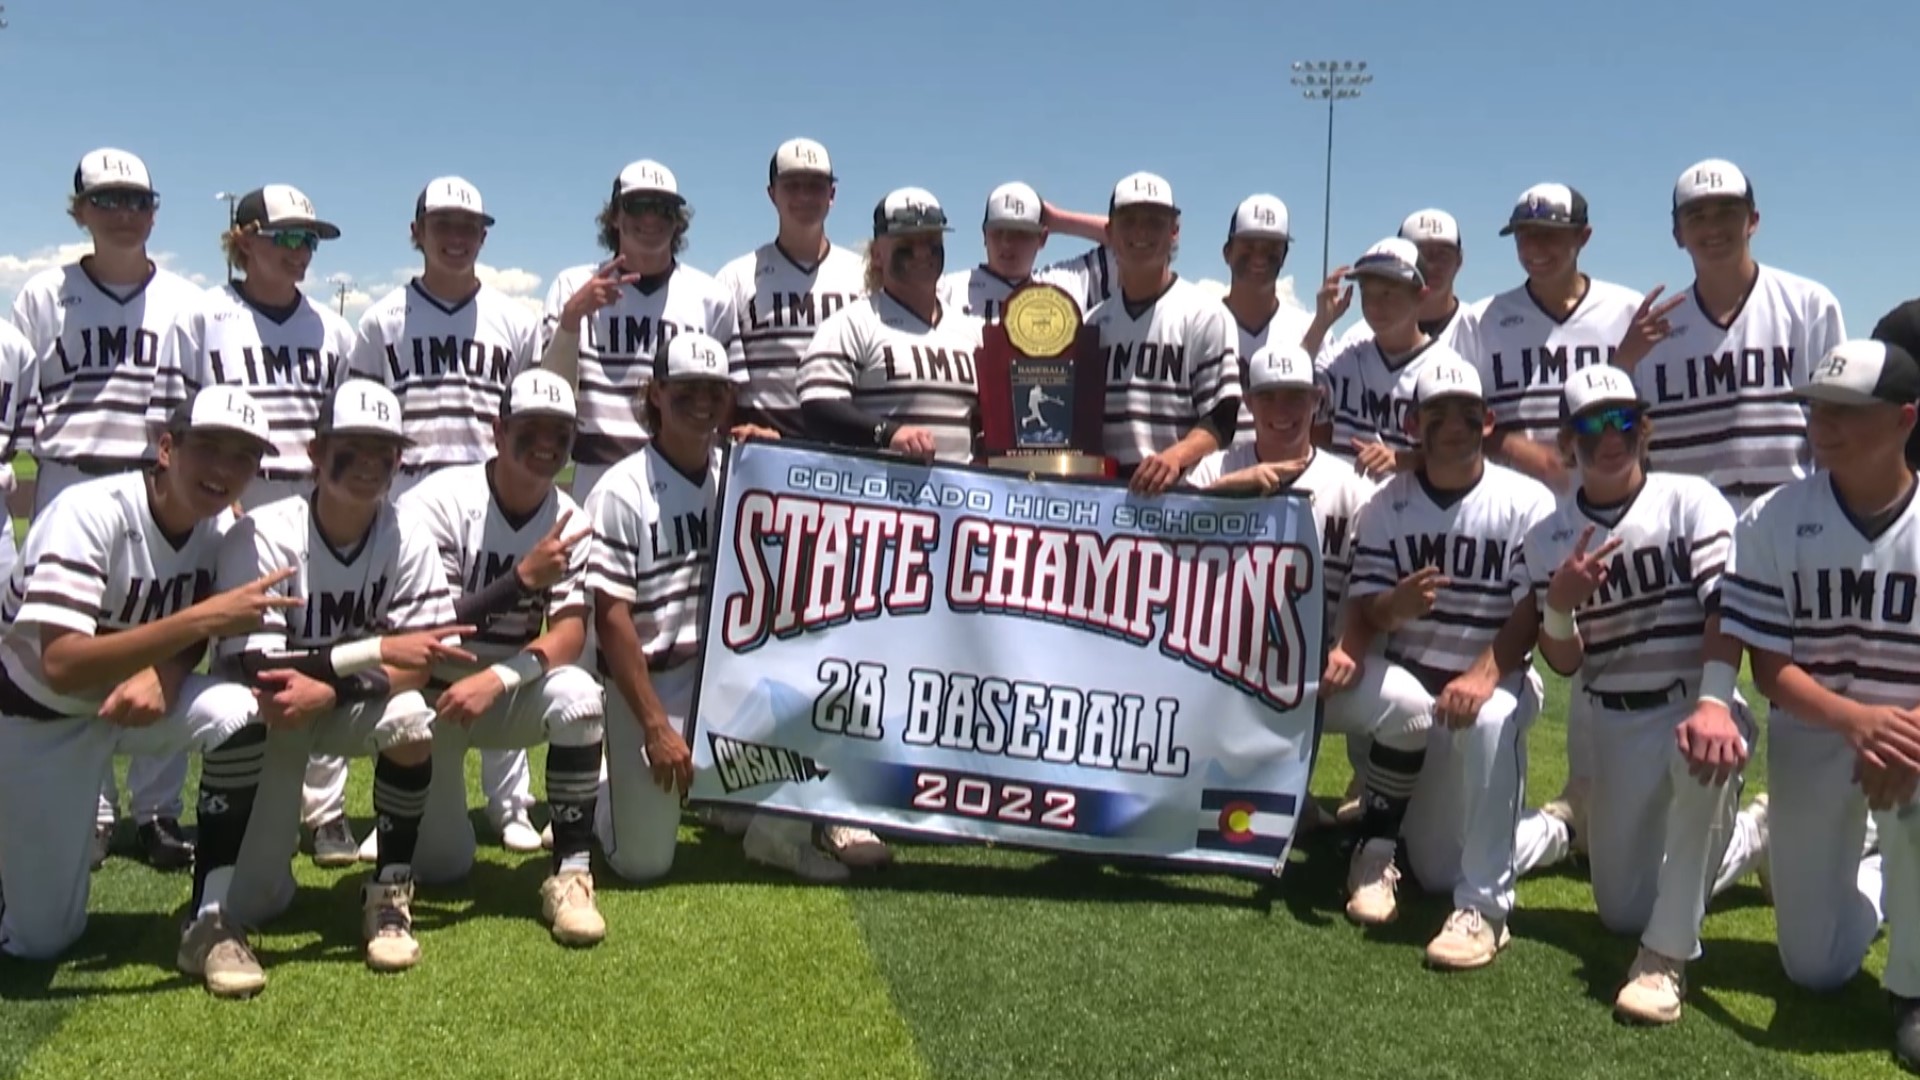 Limon defends Class 2A baseball state championship title 2022